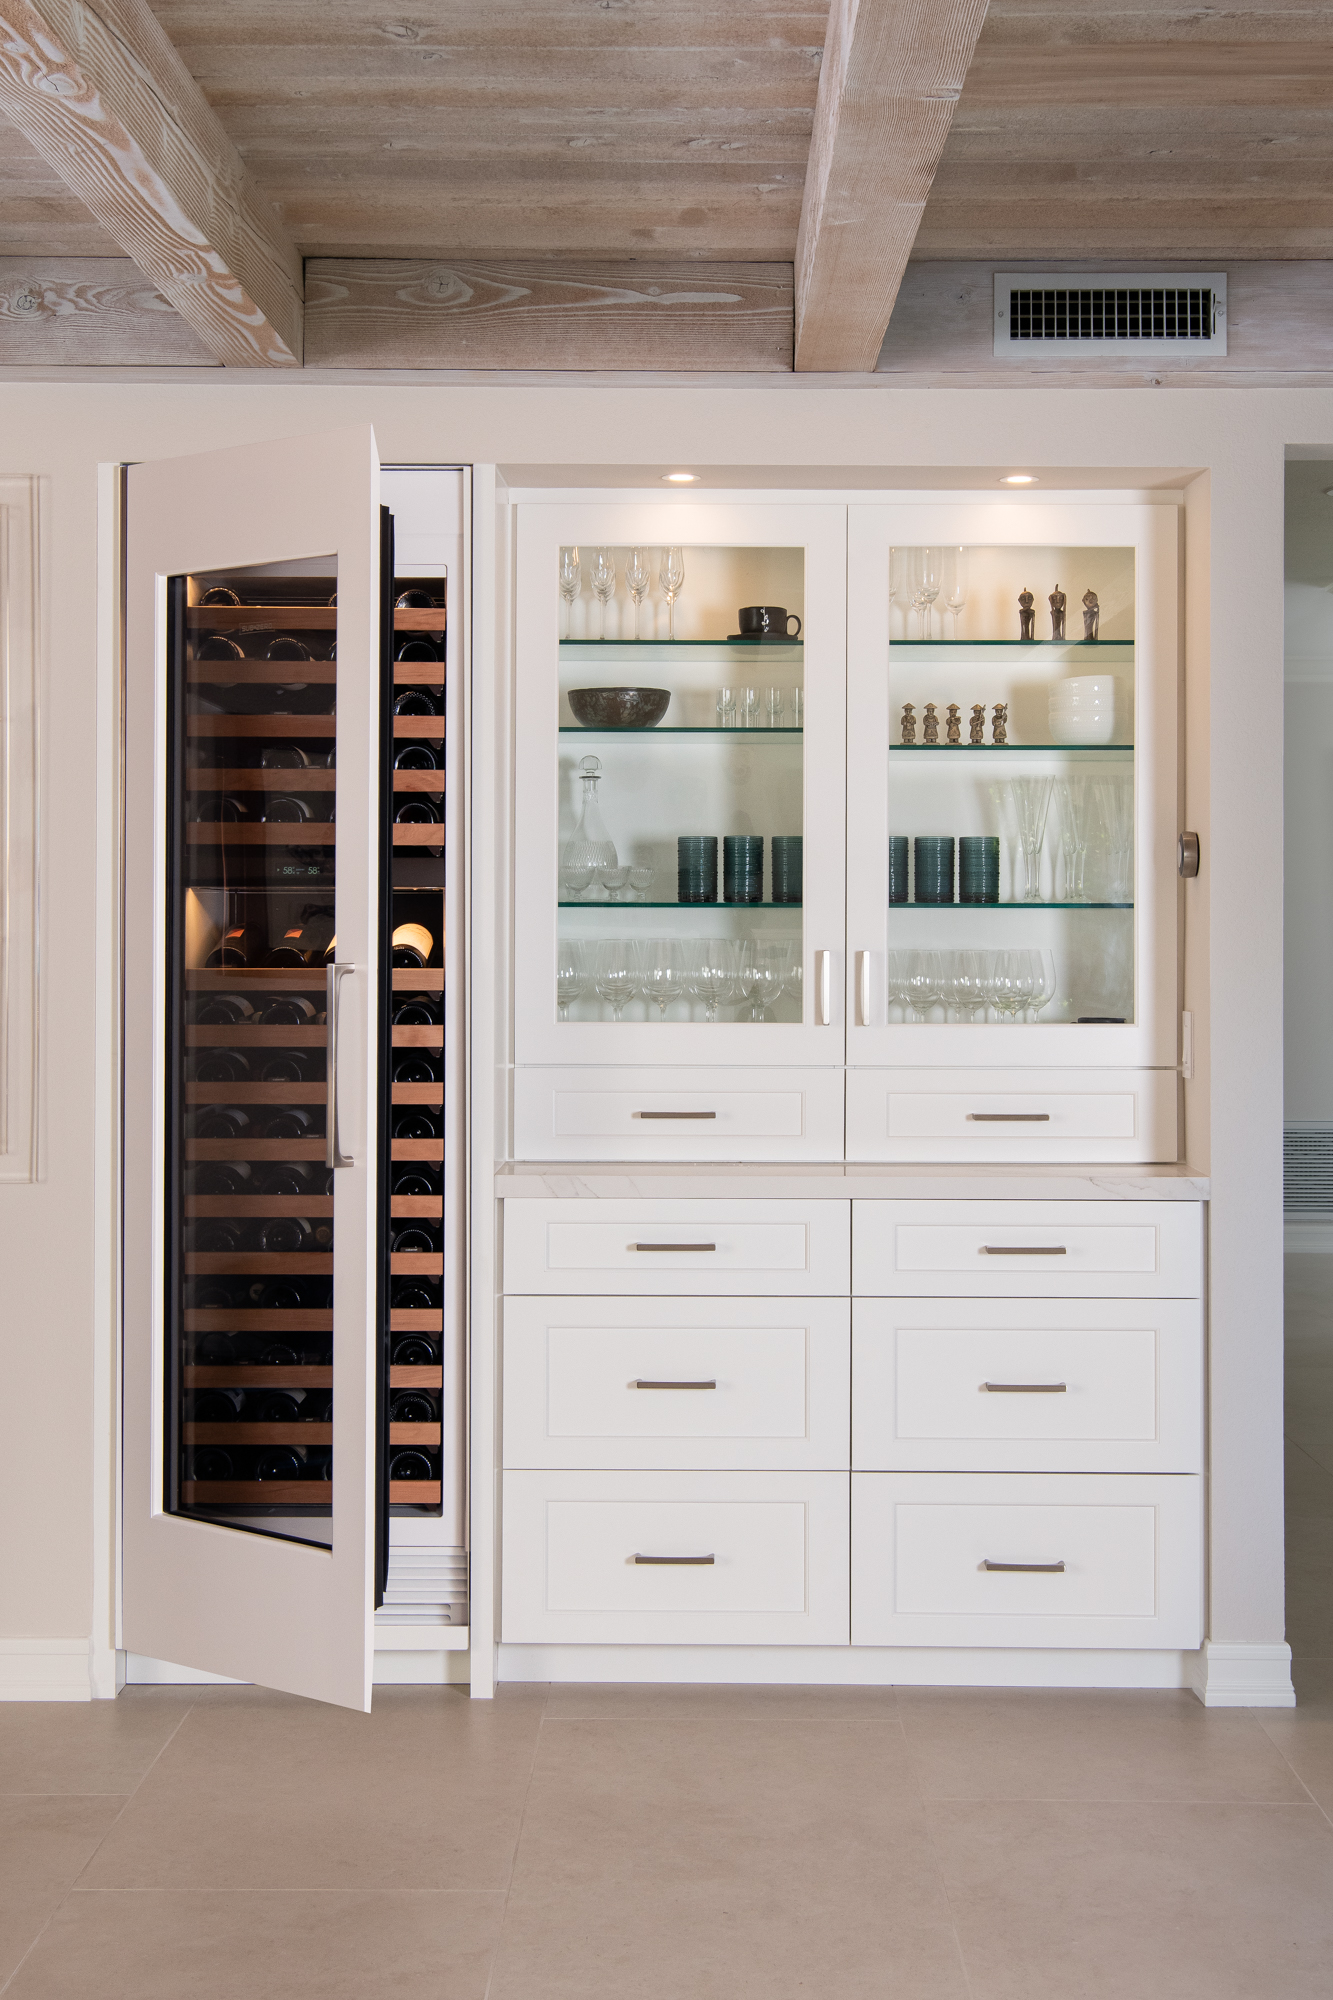 side-nook-with-clear-glass-inserts-renner-shaker-doors-and-full-sized-wine-refrigerator